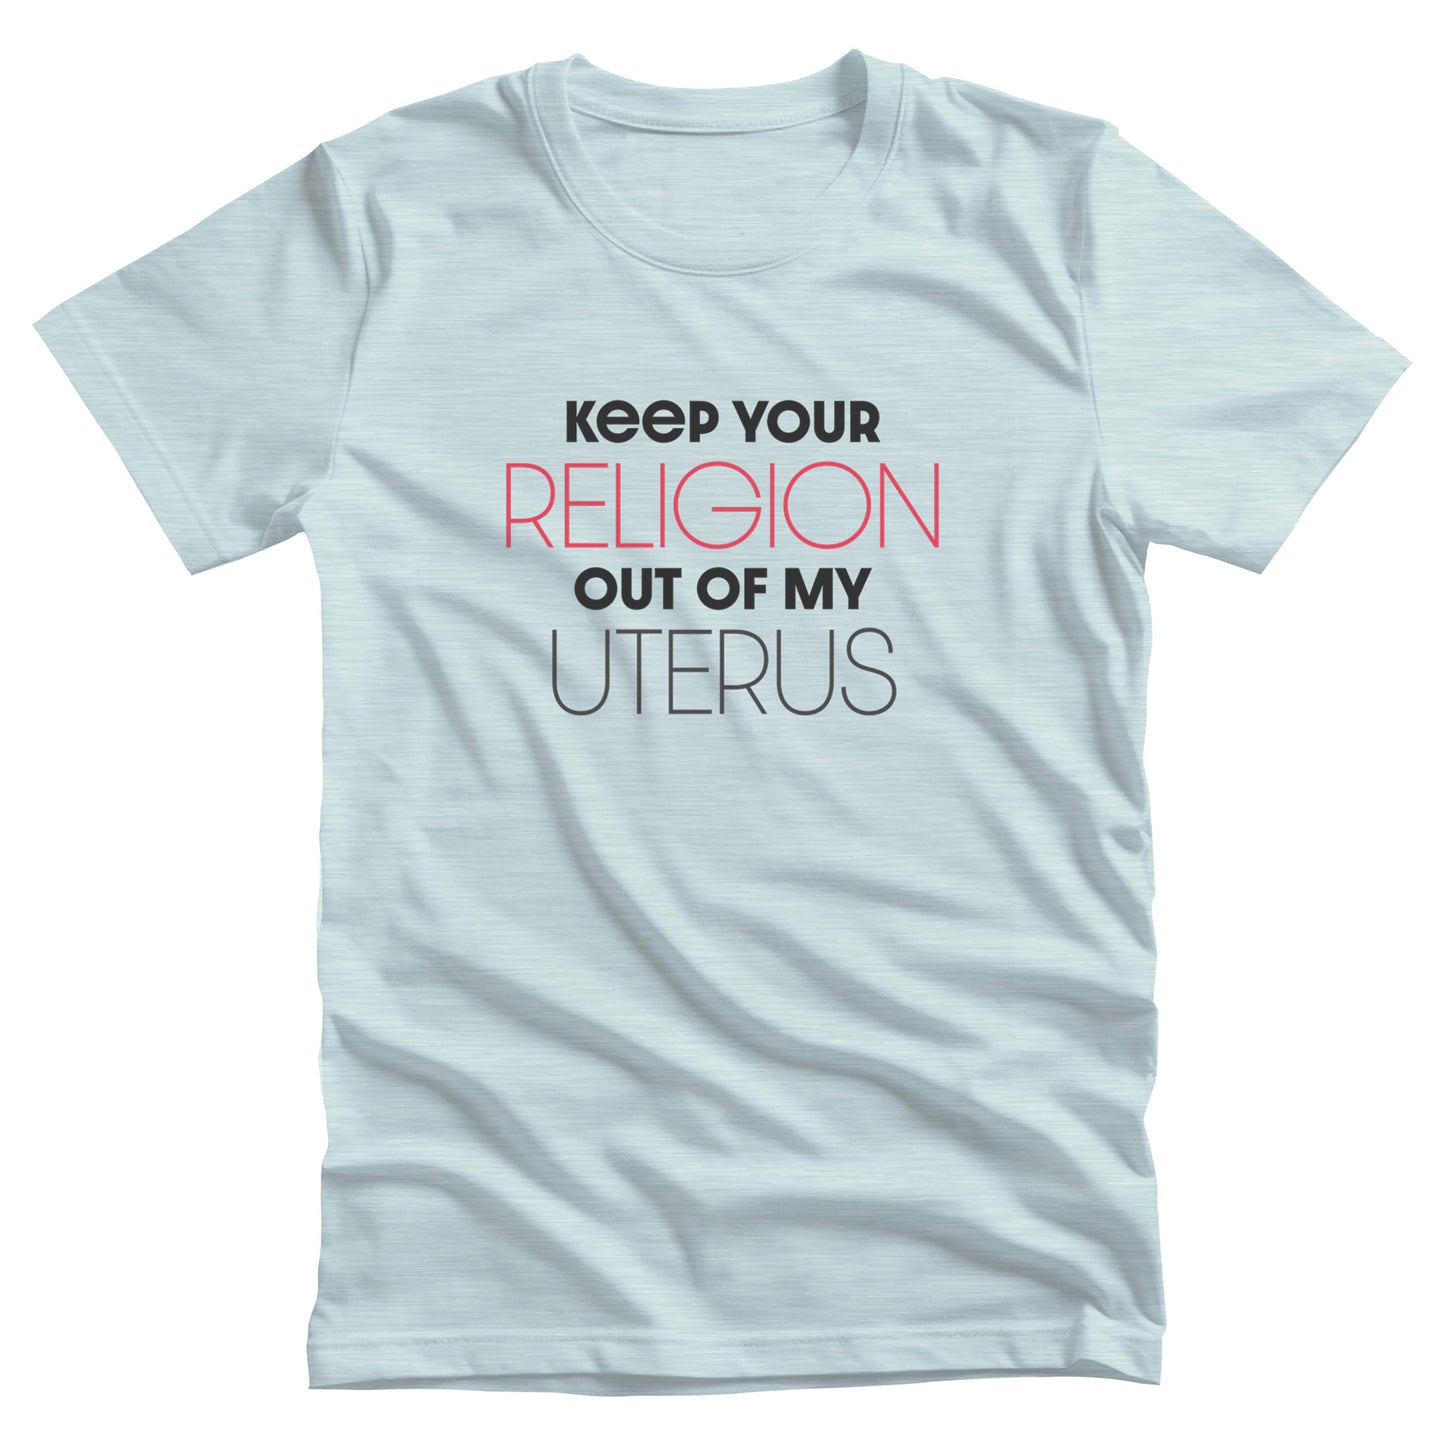 Heather Ice Blue color unisex t-shirt that says, “Keep Your Religion Out of My Uterus” in all caps. “Keep Your” is bold, “Religion” is on the next line, is a larger size, and is red, “out of my” is beneath that and in bold, and “uterus” is on the last line.